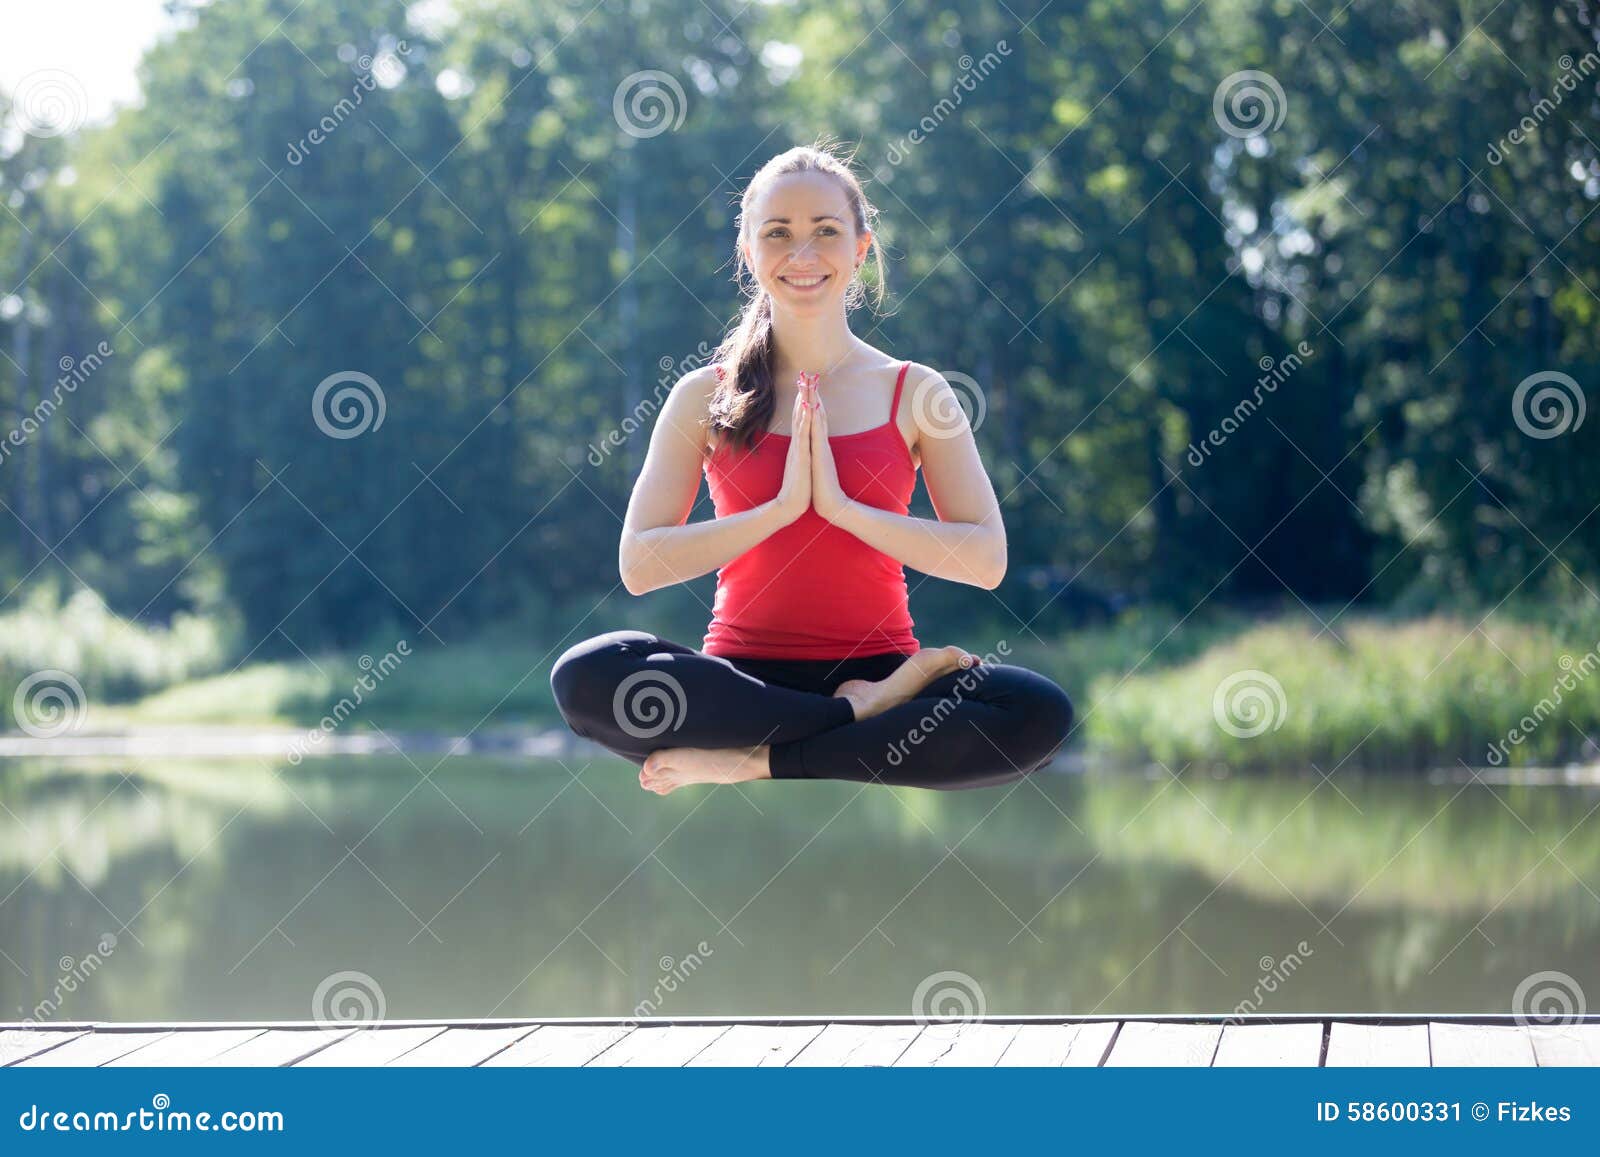 Young Athletic Woman Sitting In Lotus Pose Underwater In Swimming Pool  Stock Photo - Download Image Now - iStock